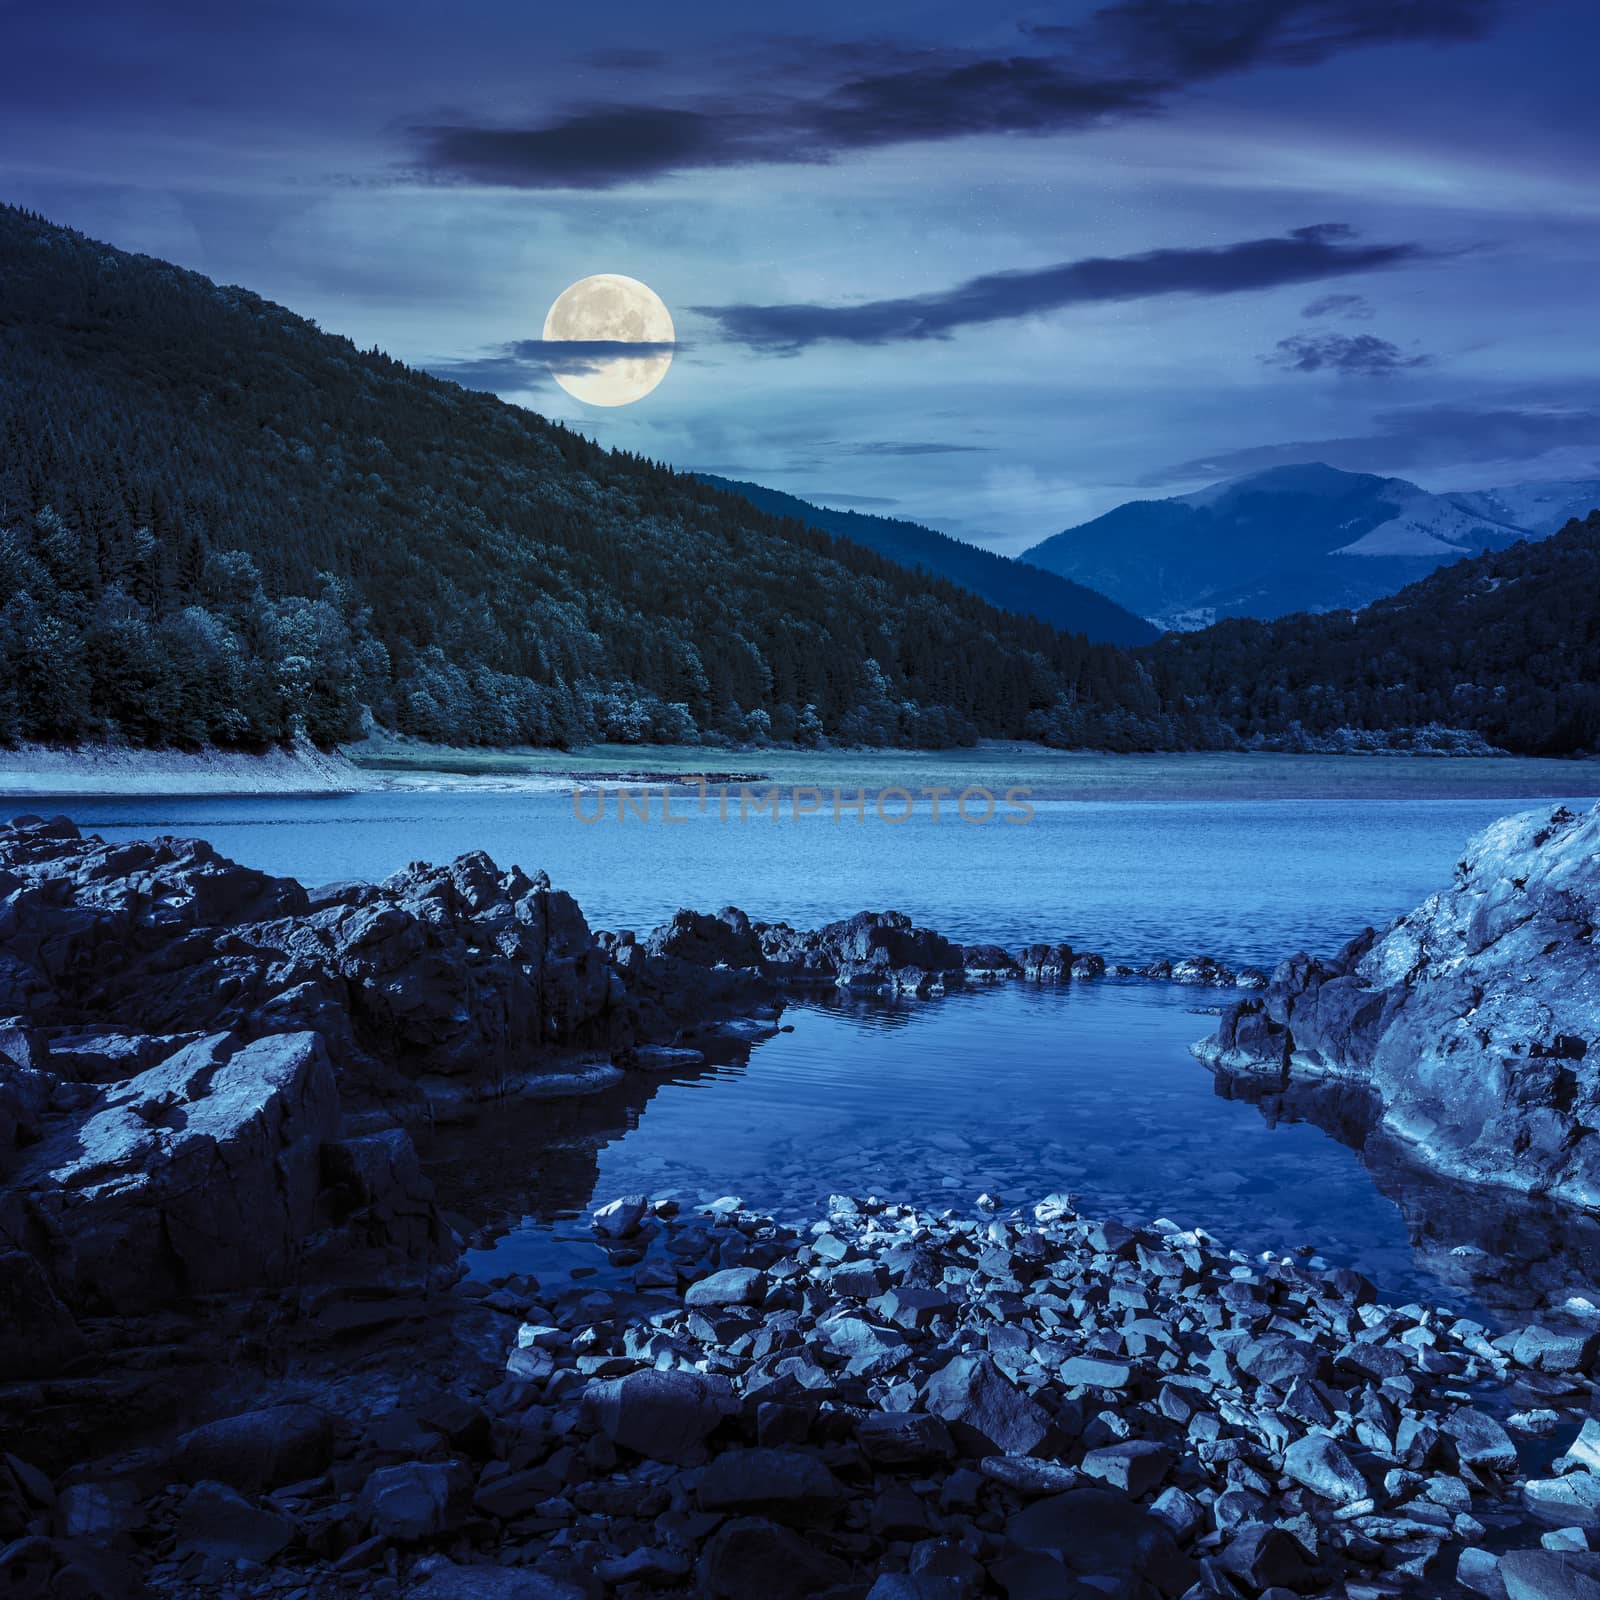 lake shore with stones near pine forest on mountain at night by Pellinni